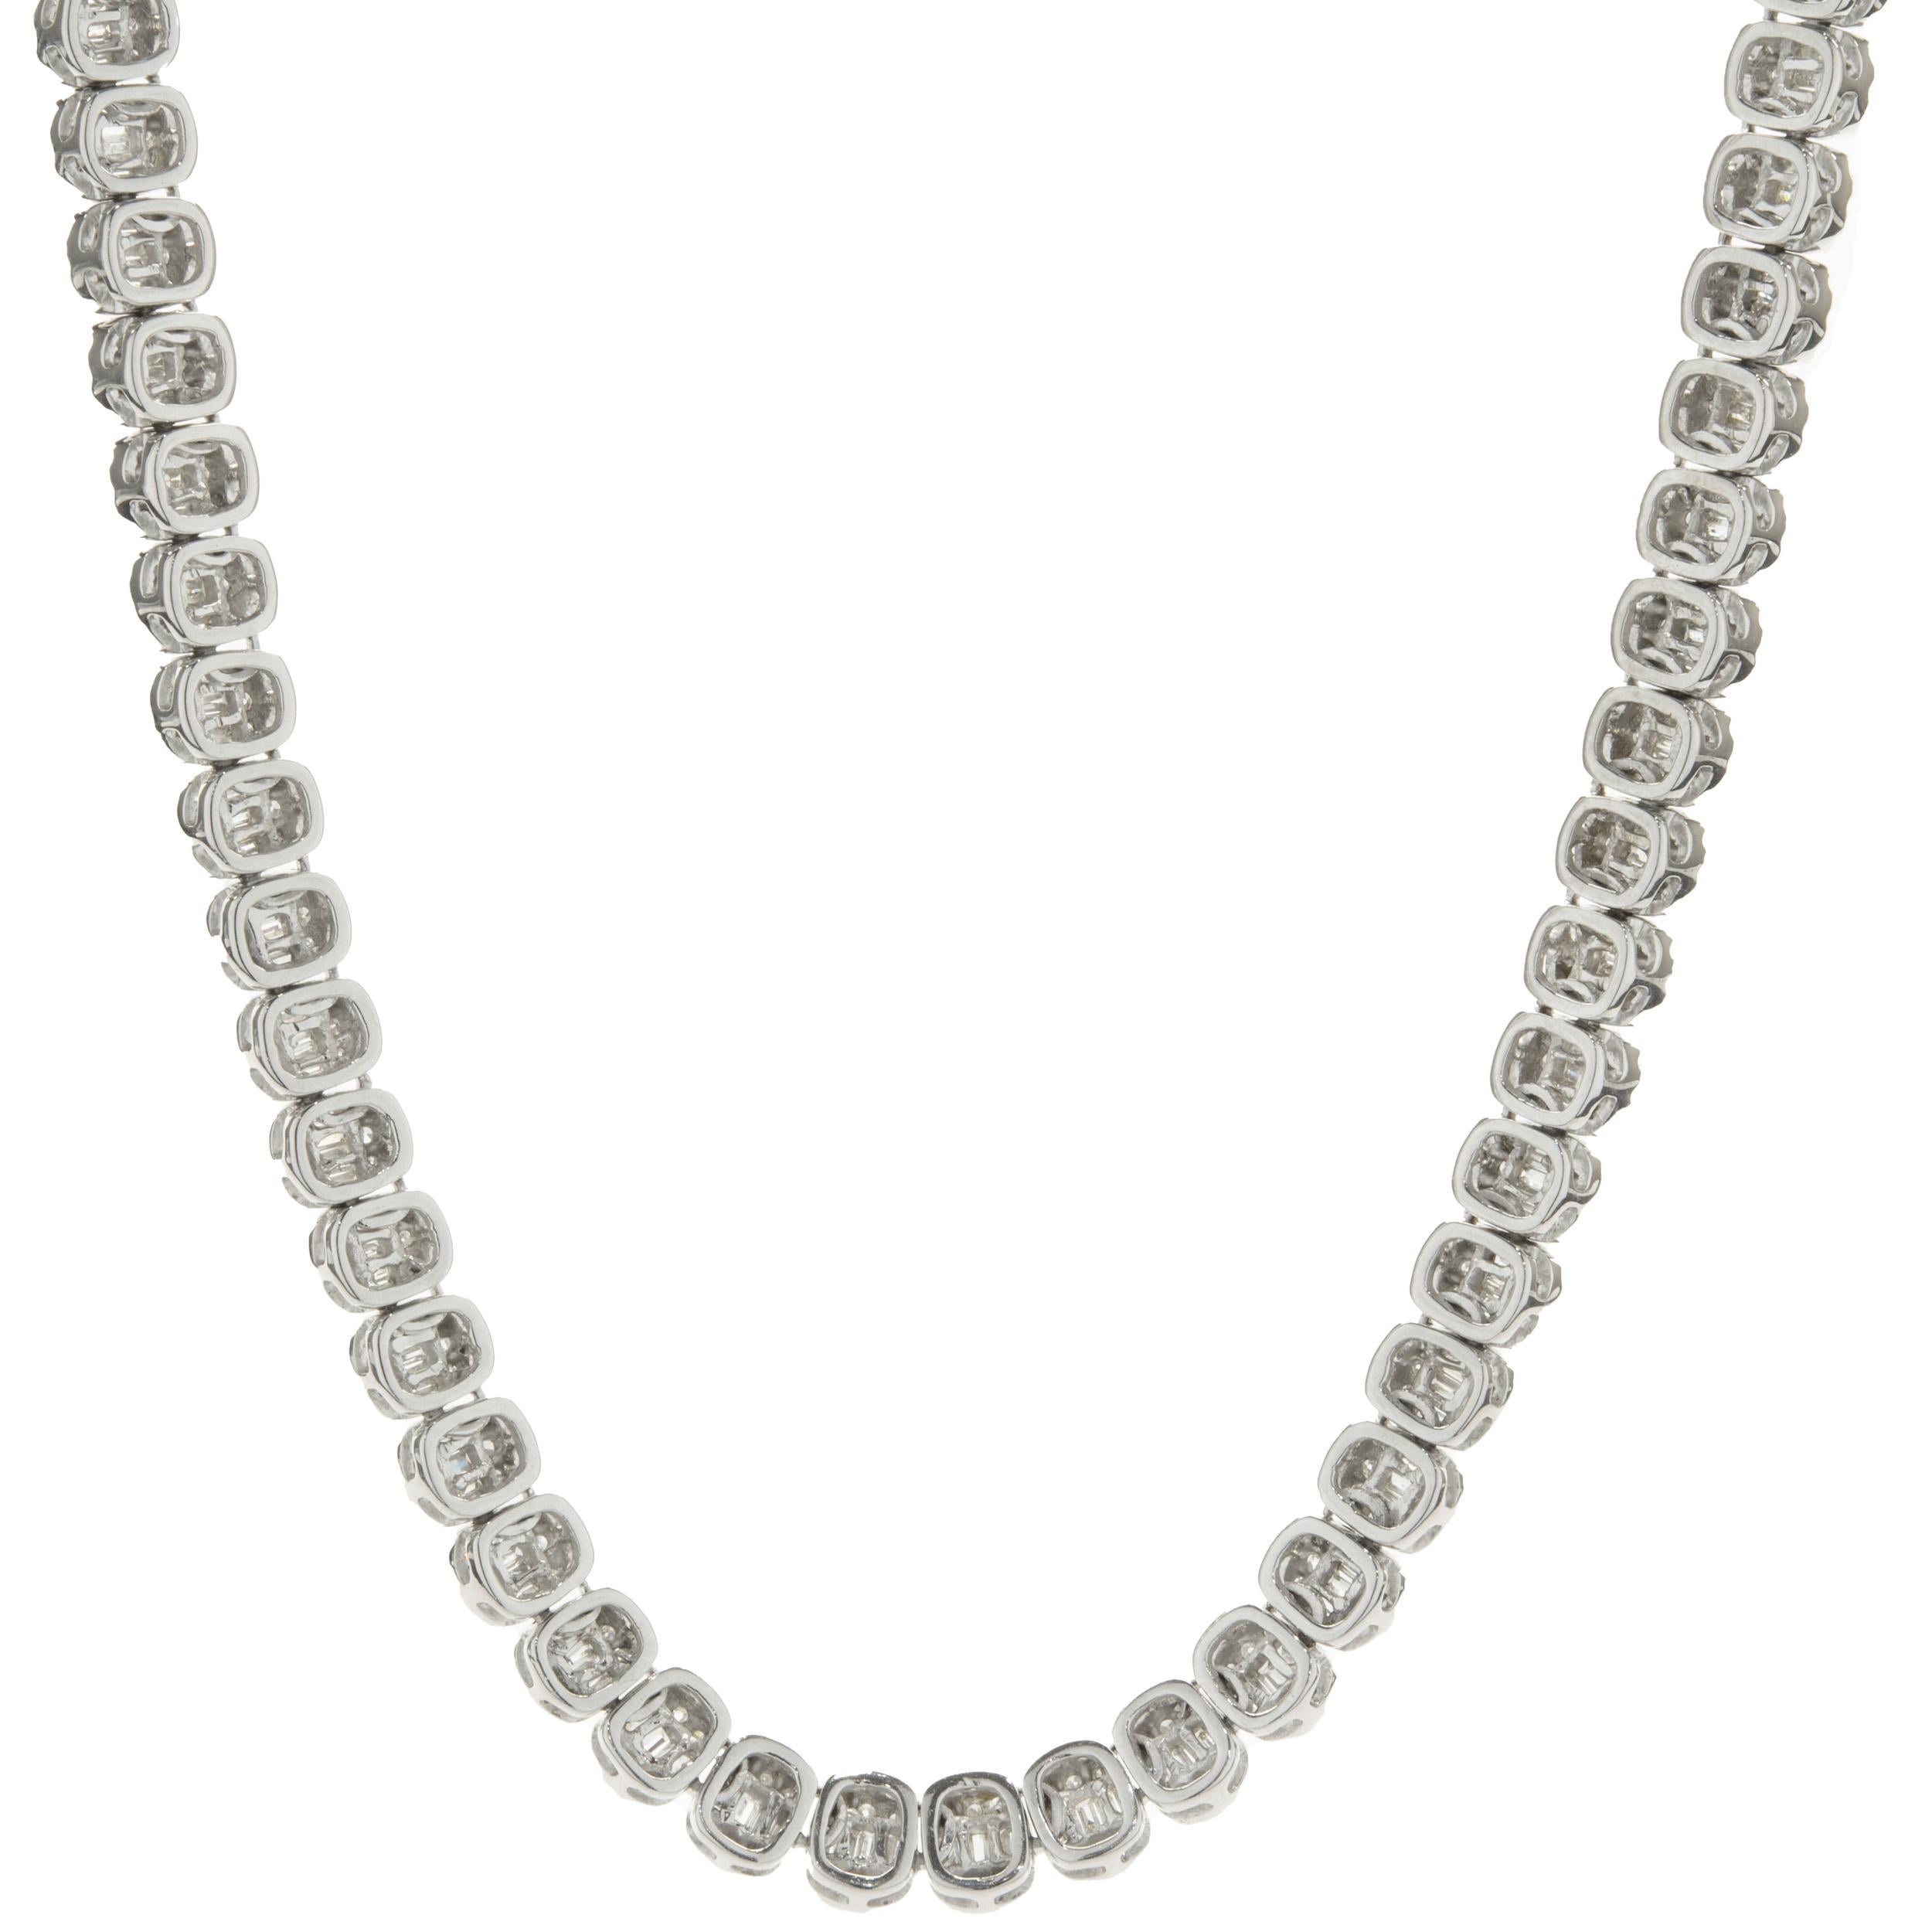 Designer: custom	
Material: 14K white gold
Diamonds: round and baguette cut = 6.97cttw
Color: G / H
Clarity: SI1
Dimensions: necklace measures 18.5-inches in length 
Weight: 39.88 grams
